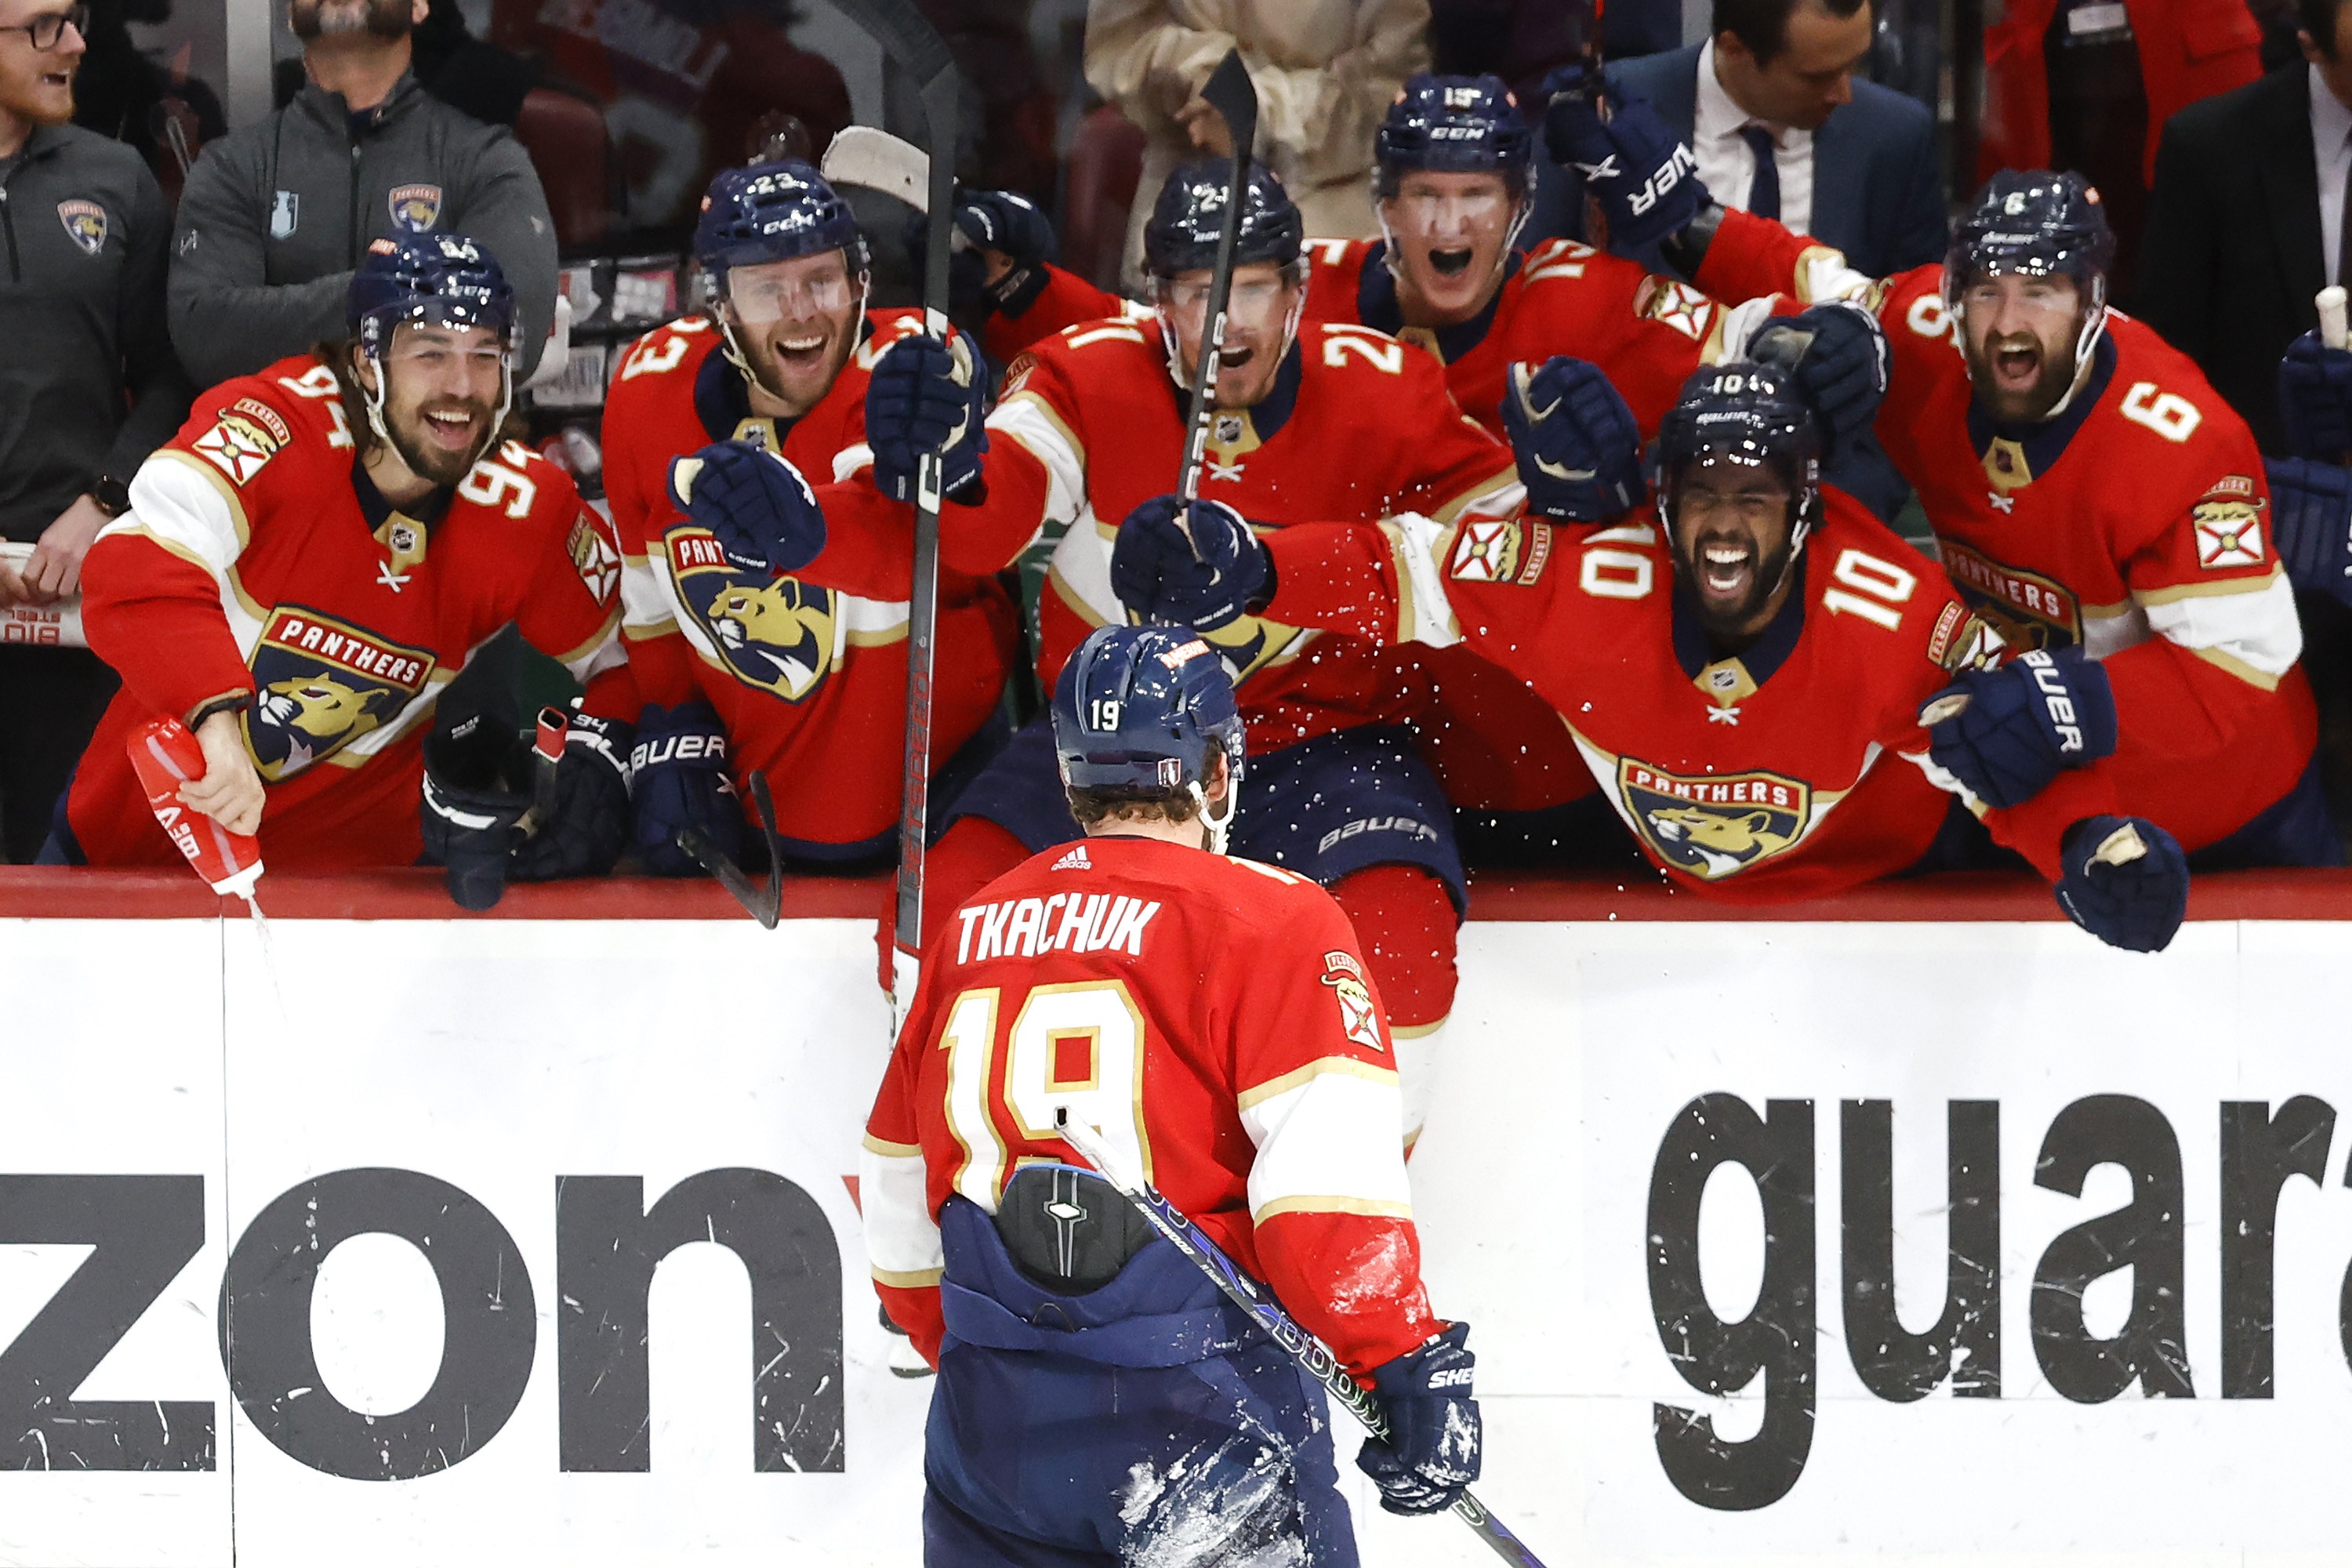 Panthers' Matthew Tkachuk Well-Deserving of All-Star Selection